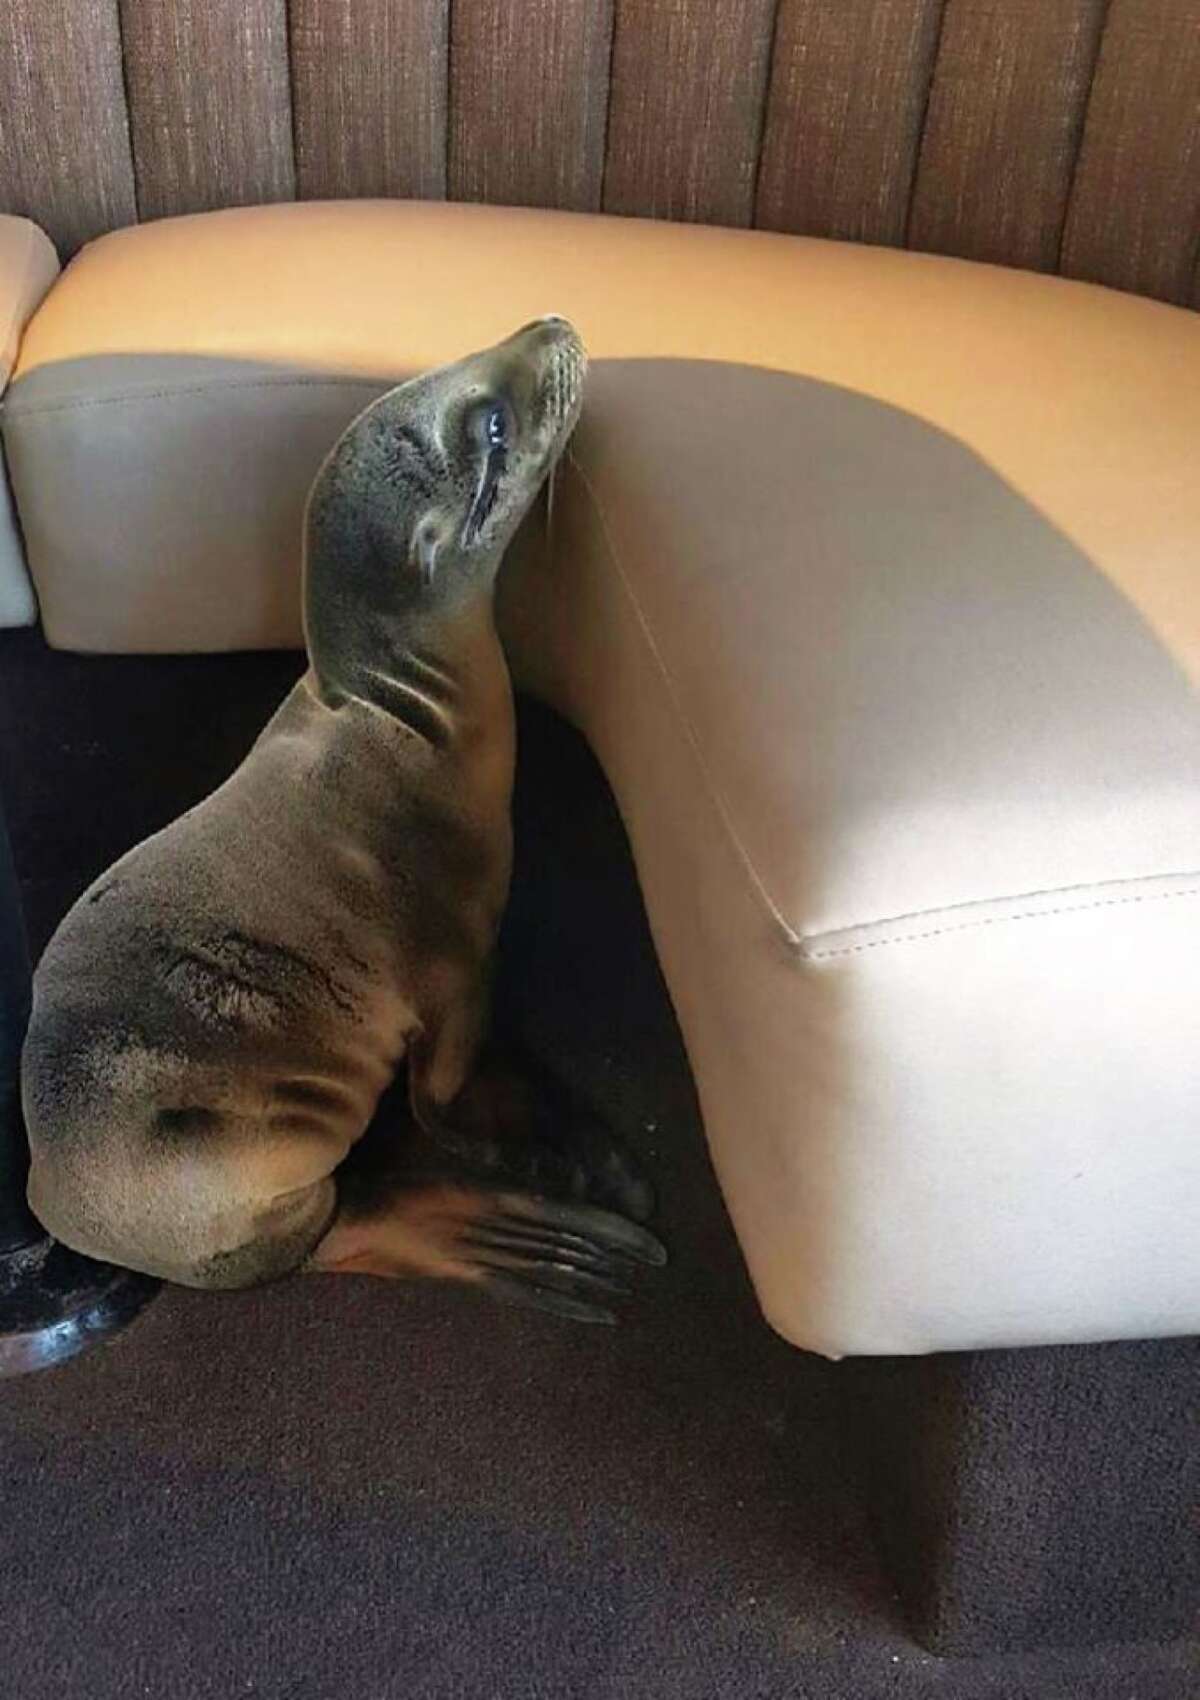 A malnourished sea lion pup pulled up to a booth at the beachside Marine Room restaurant in La Jolla, Calif., on Thursday, Feb. 4, 2016.